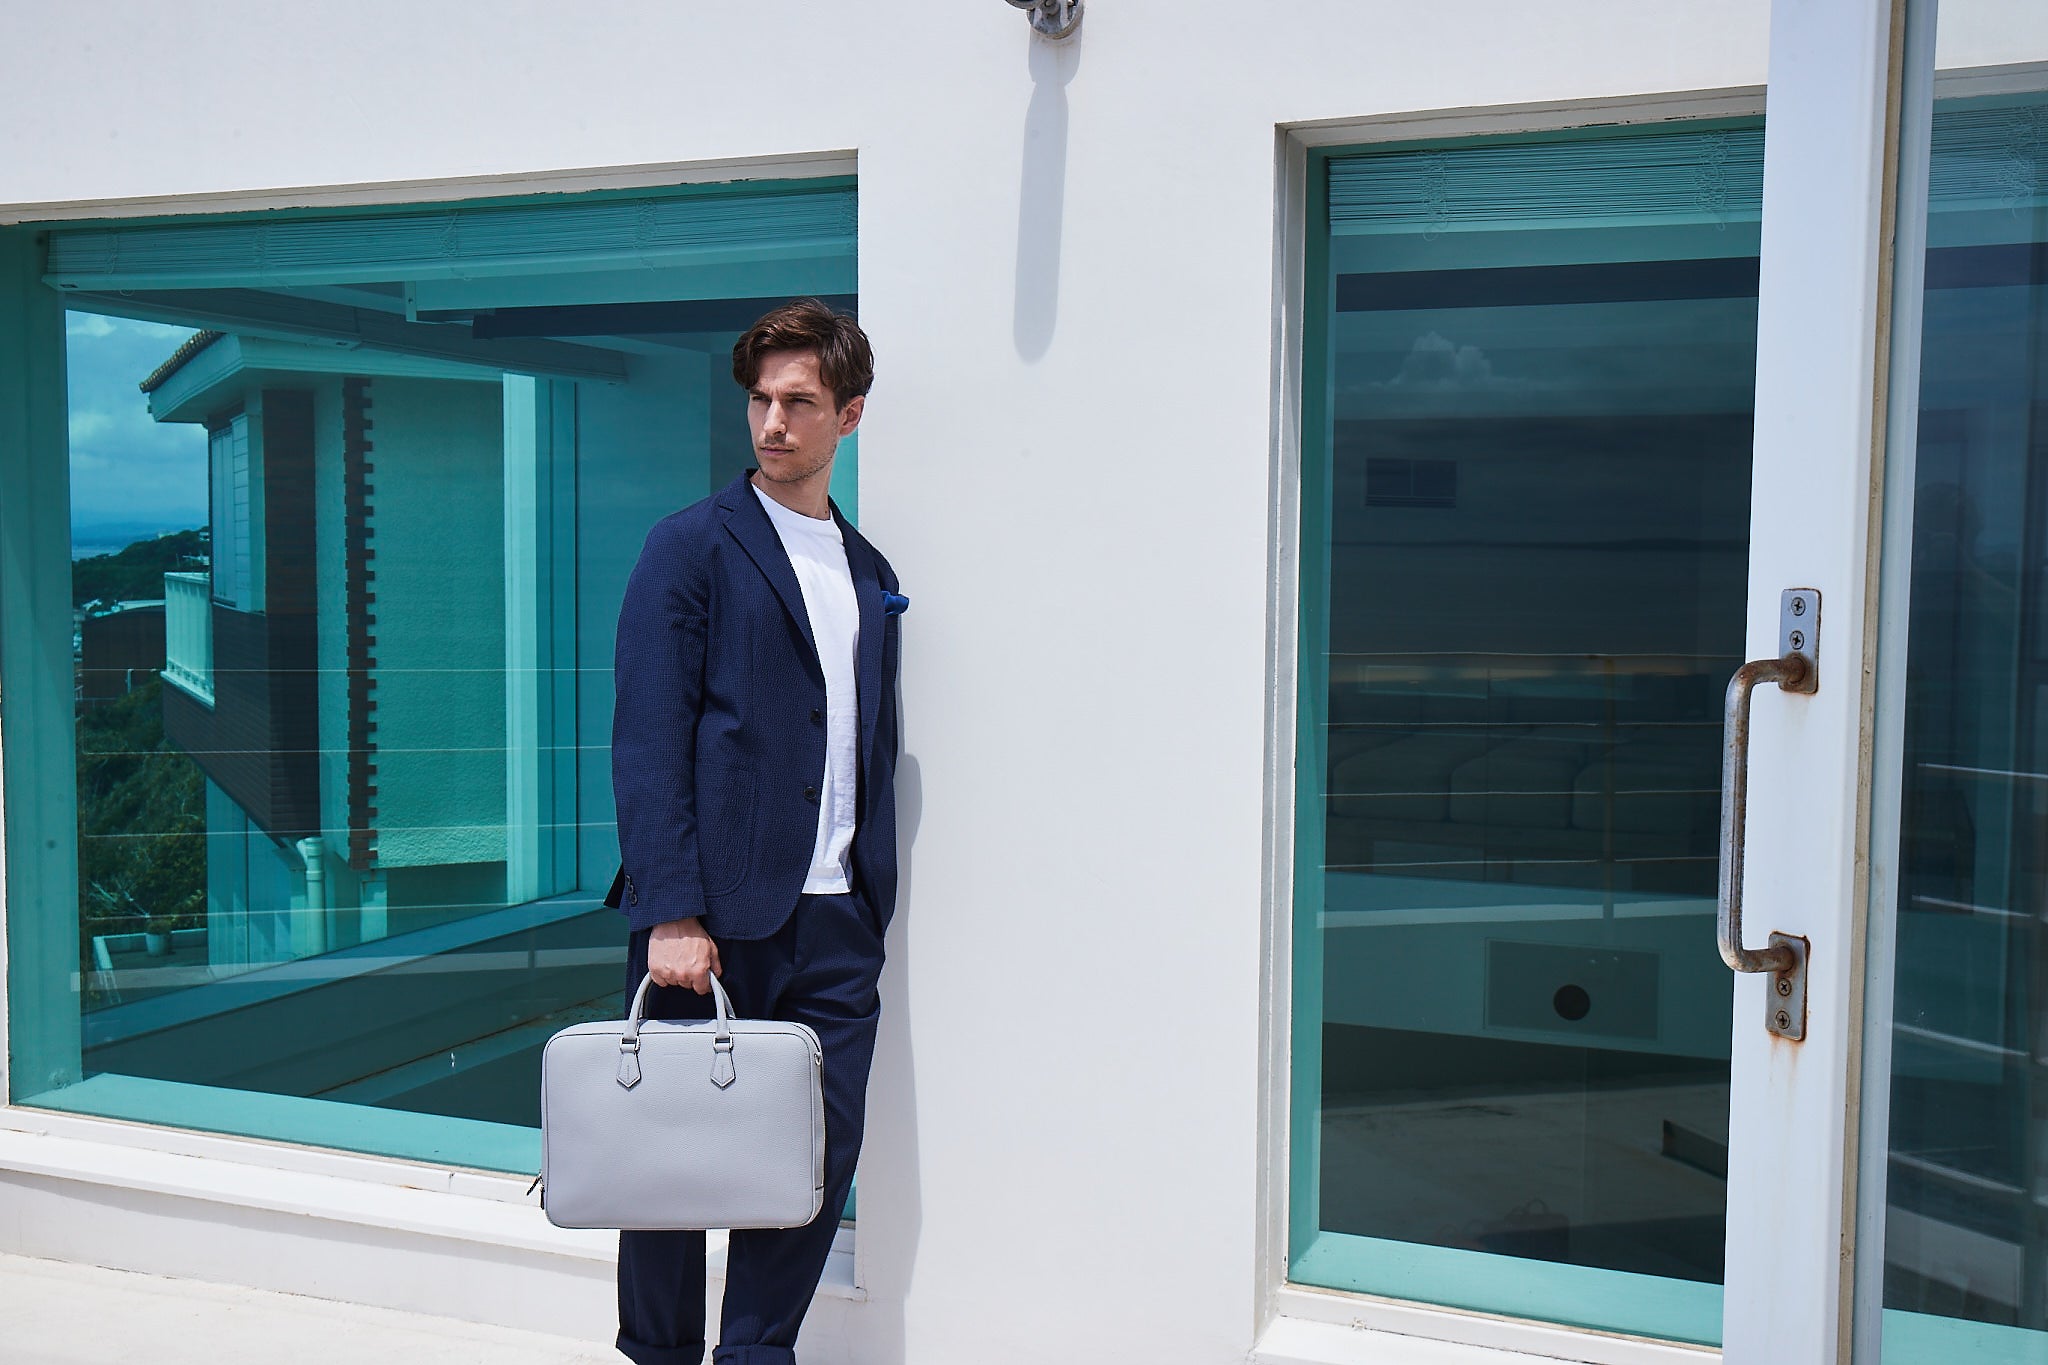 A stylishly dressed man carries a high-quality leather business briefcase to the office.